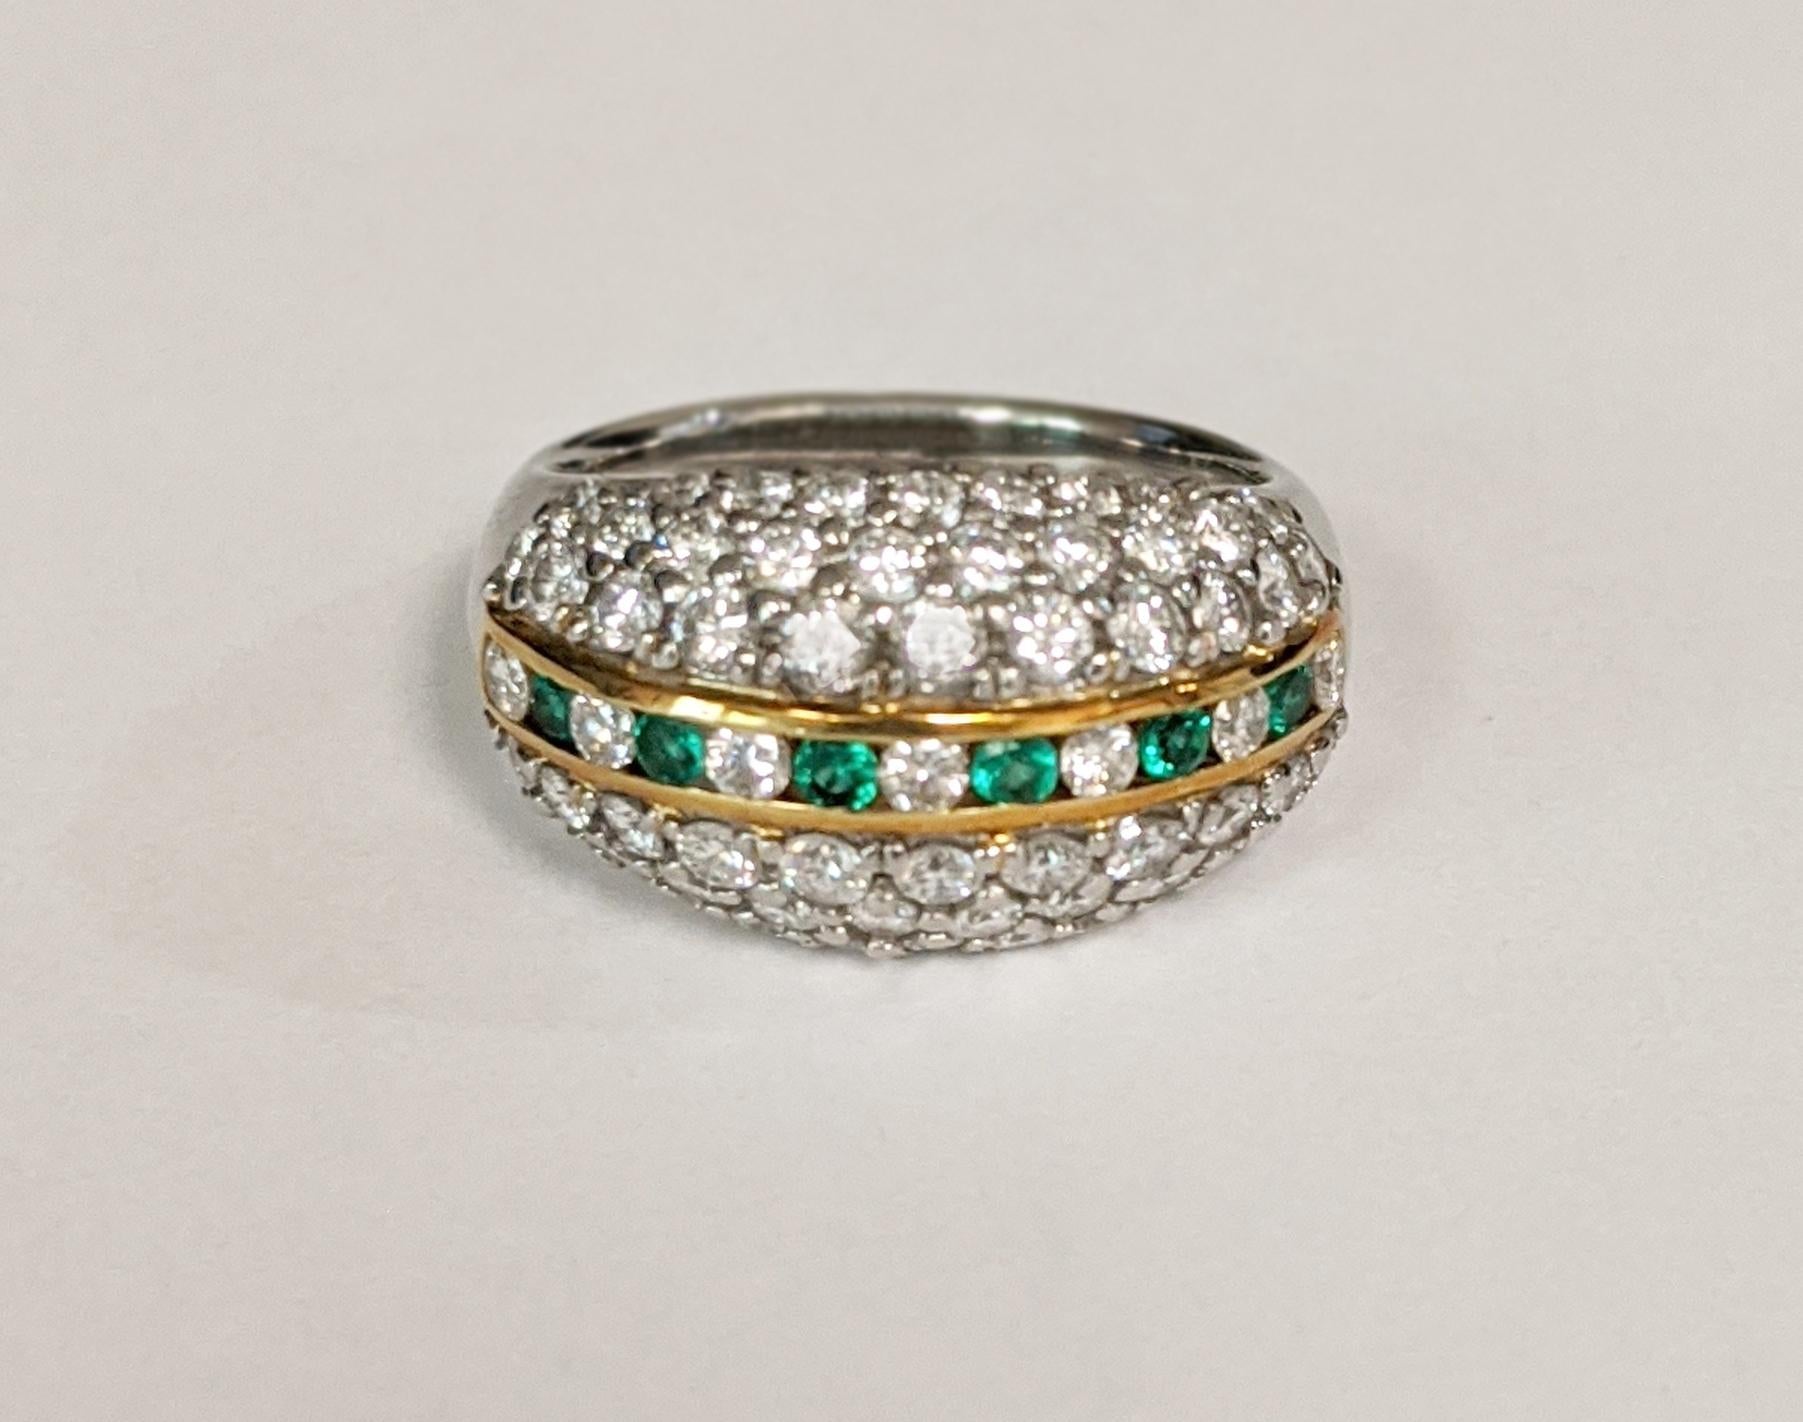 Bead-set round brilliant diamonds cover the dome of this retro ring, separated in the center by a channel of alternating round emeralds and diamonds. Handcrafted in platinum with yellow gold accents.

The ring contains approximately 63 round